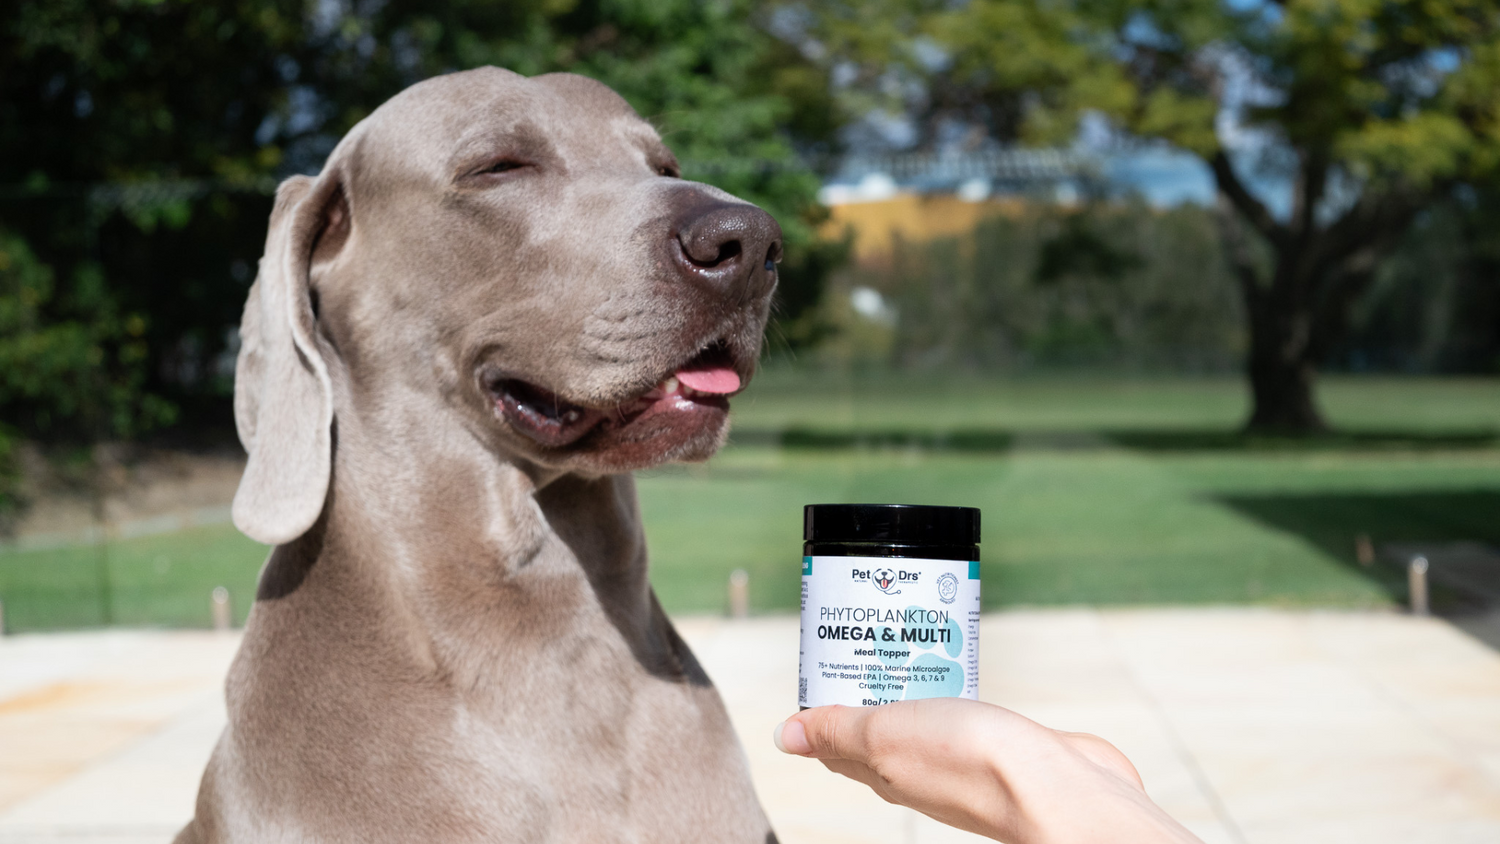 The Way of the Future: Sustainable Omega 3 for our Pets